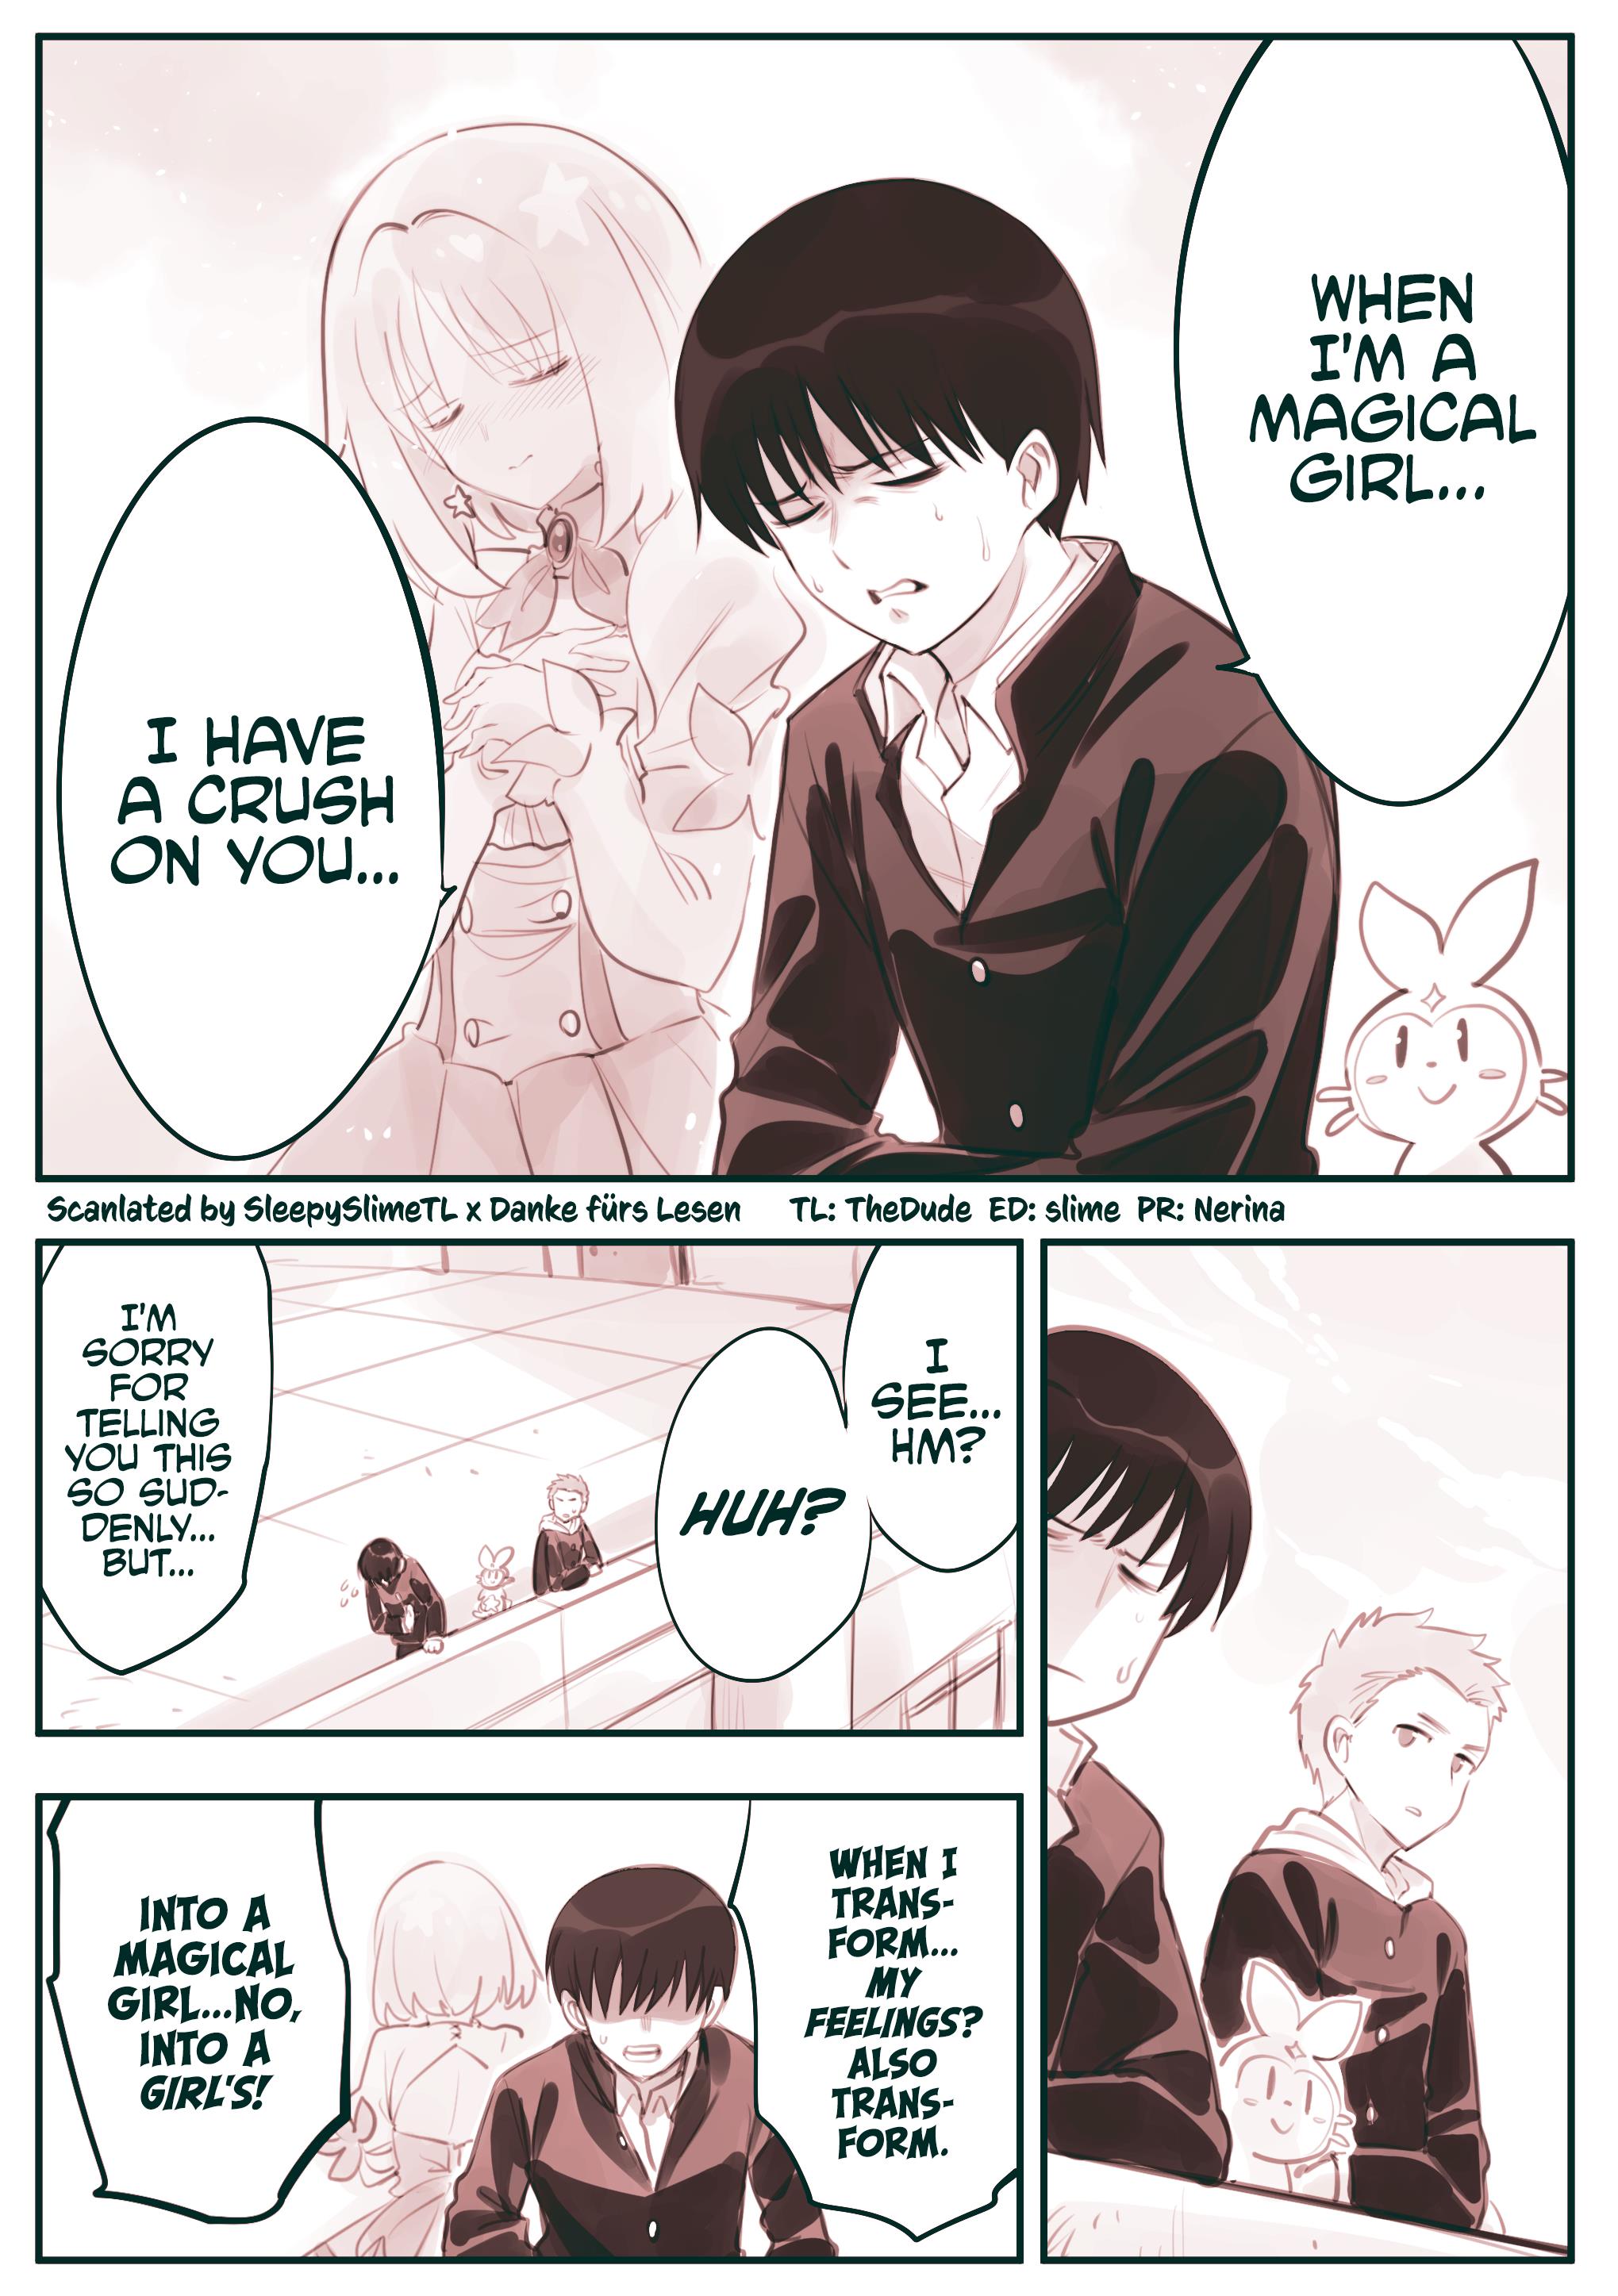 He Is A Magical Girl - Page 1